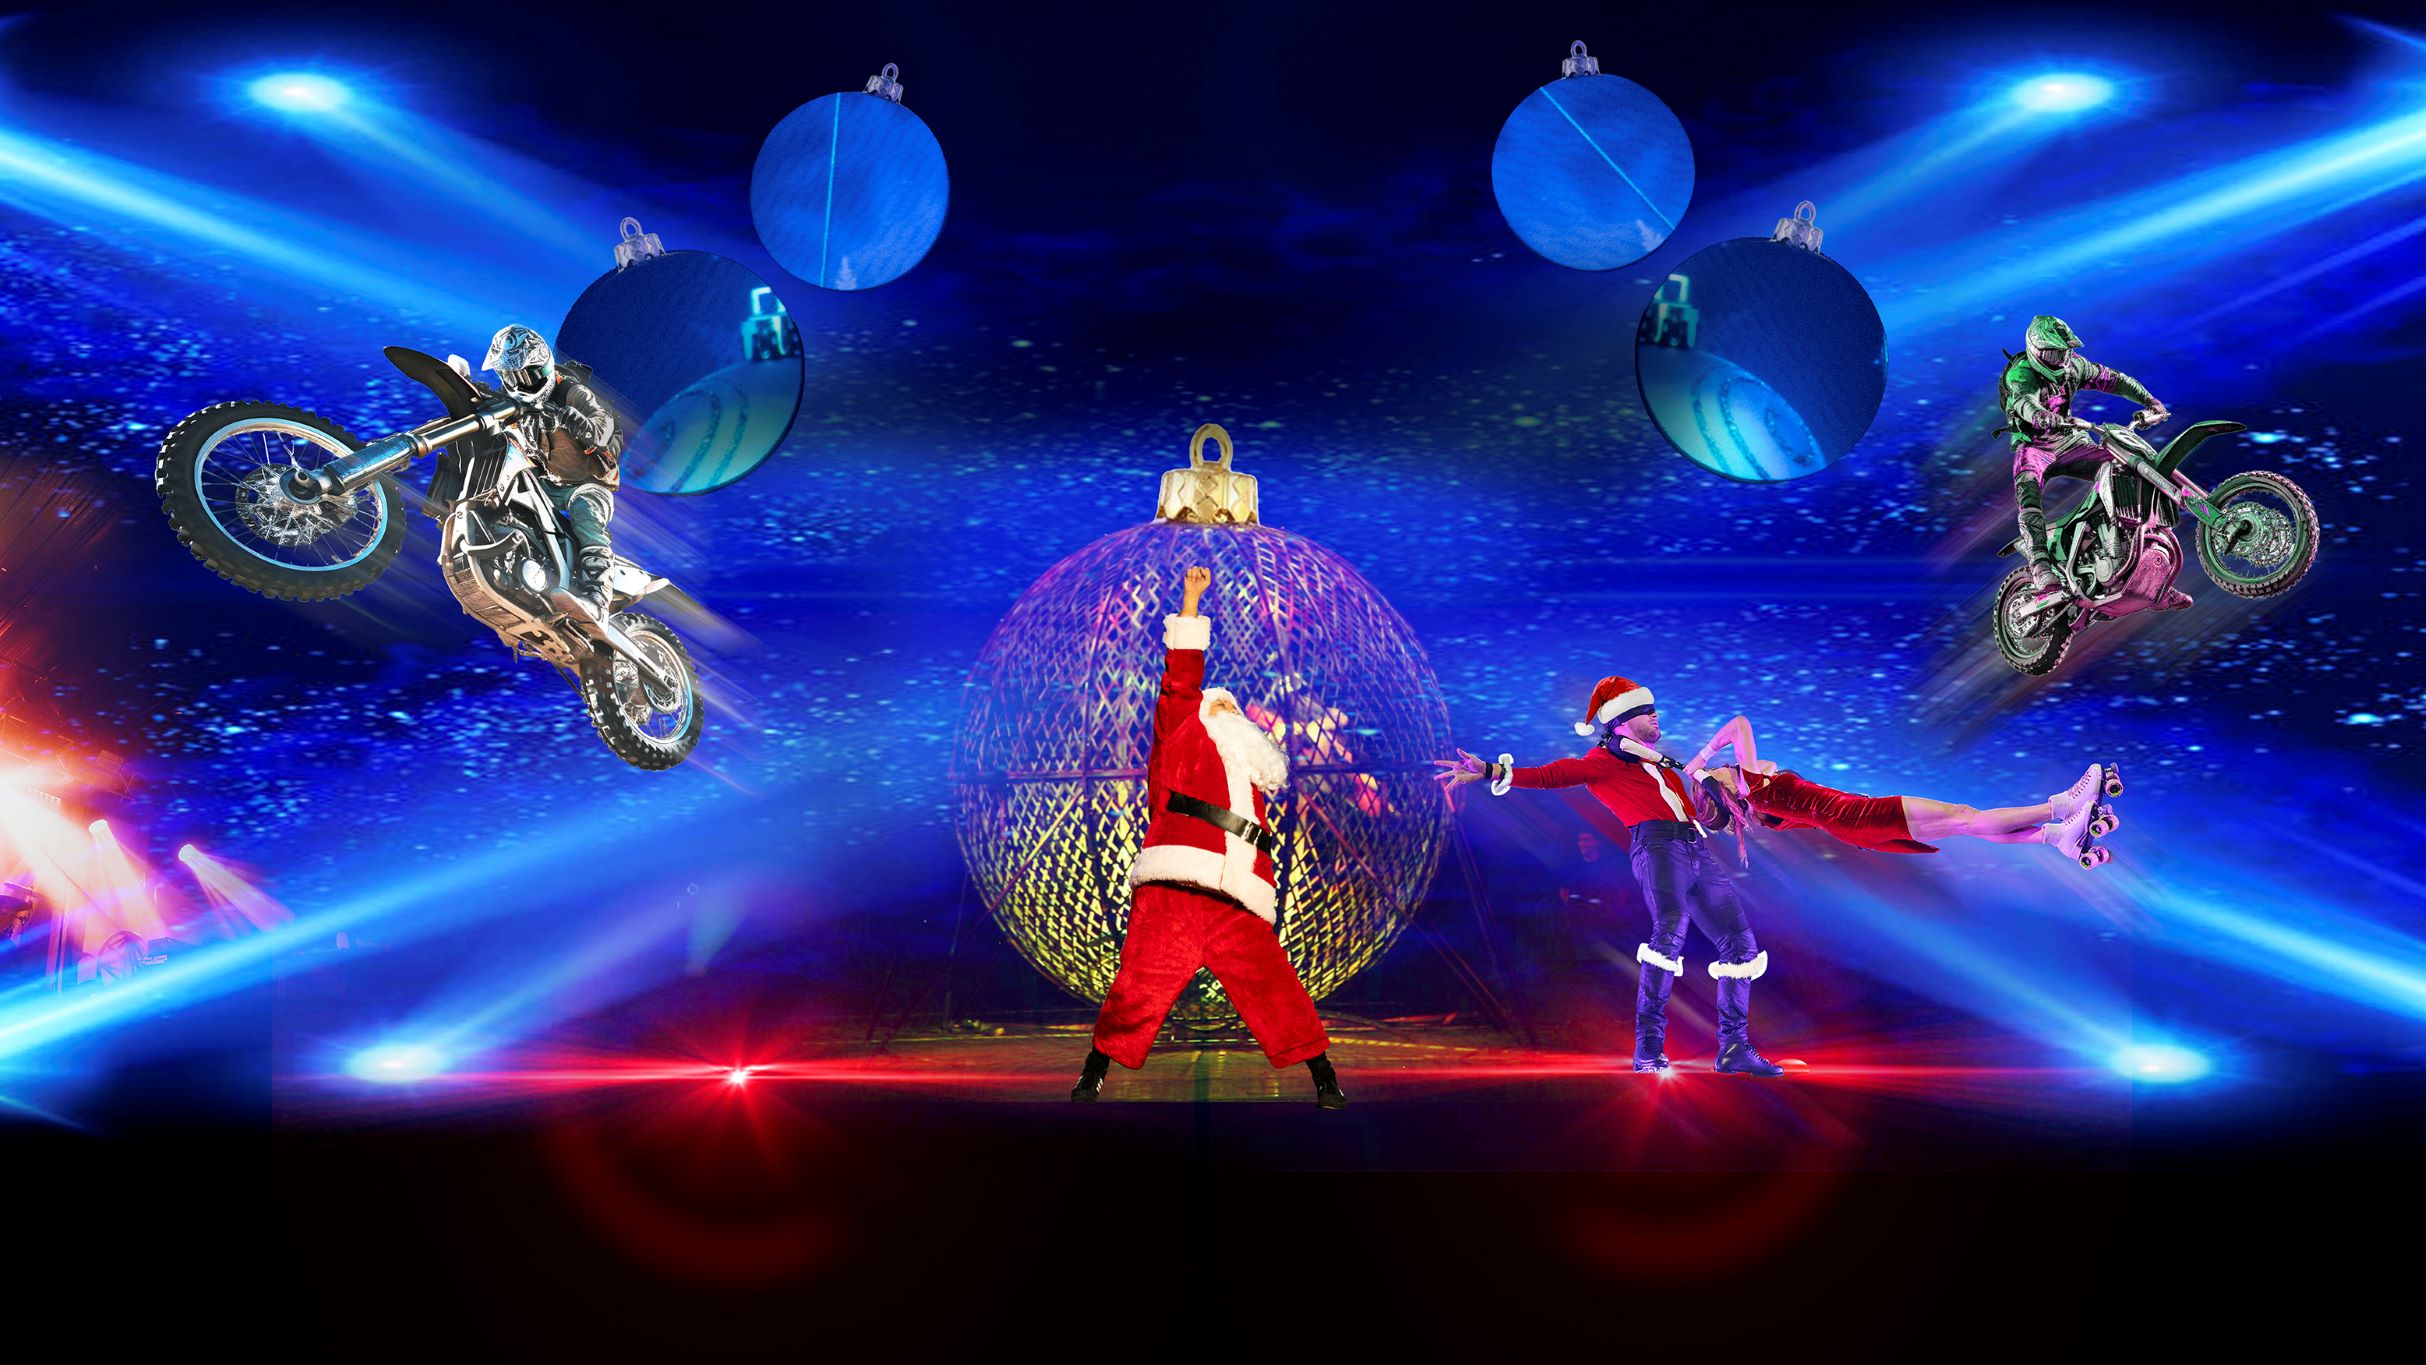 A Christmas RockStory - A Holiday Circus Spectacular! in Pickering promo photo for Me + 3  presale offer code